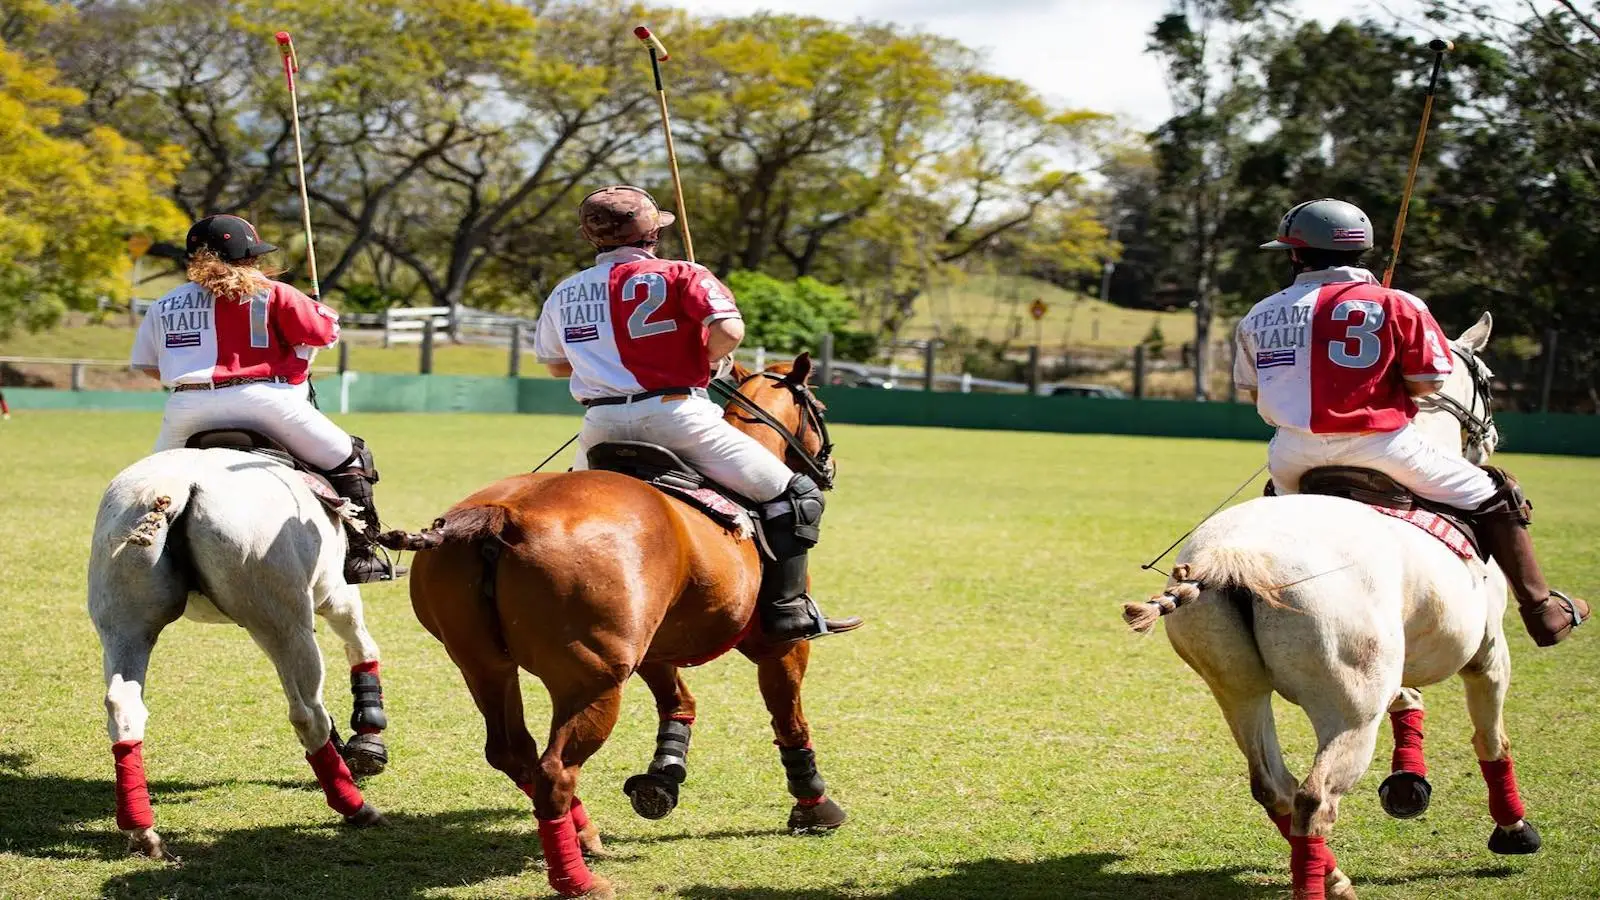 Three polo players wearing red and white uniforms, labeled with numbers 2 and 3, ride horses with red leg wraps on a grassy field. Trees and a green fence are seen in the background under a partly cloudy sky, reminiscent of scenic places to visit on Maui.